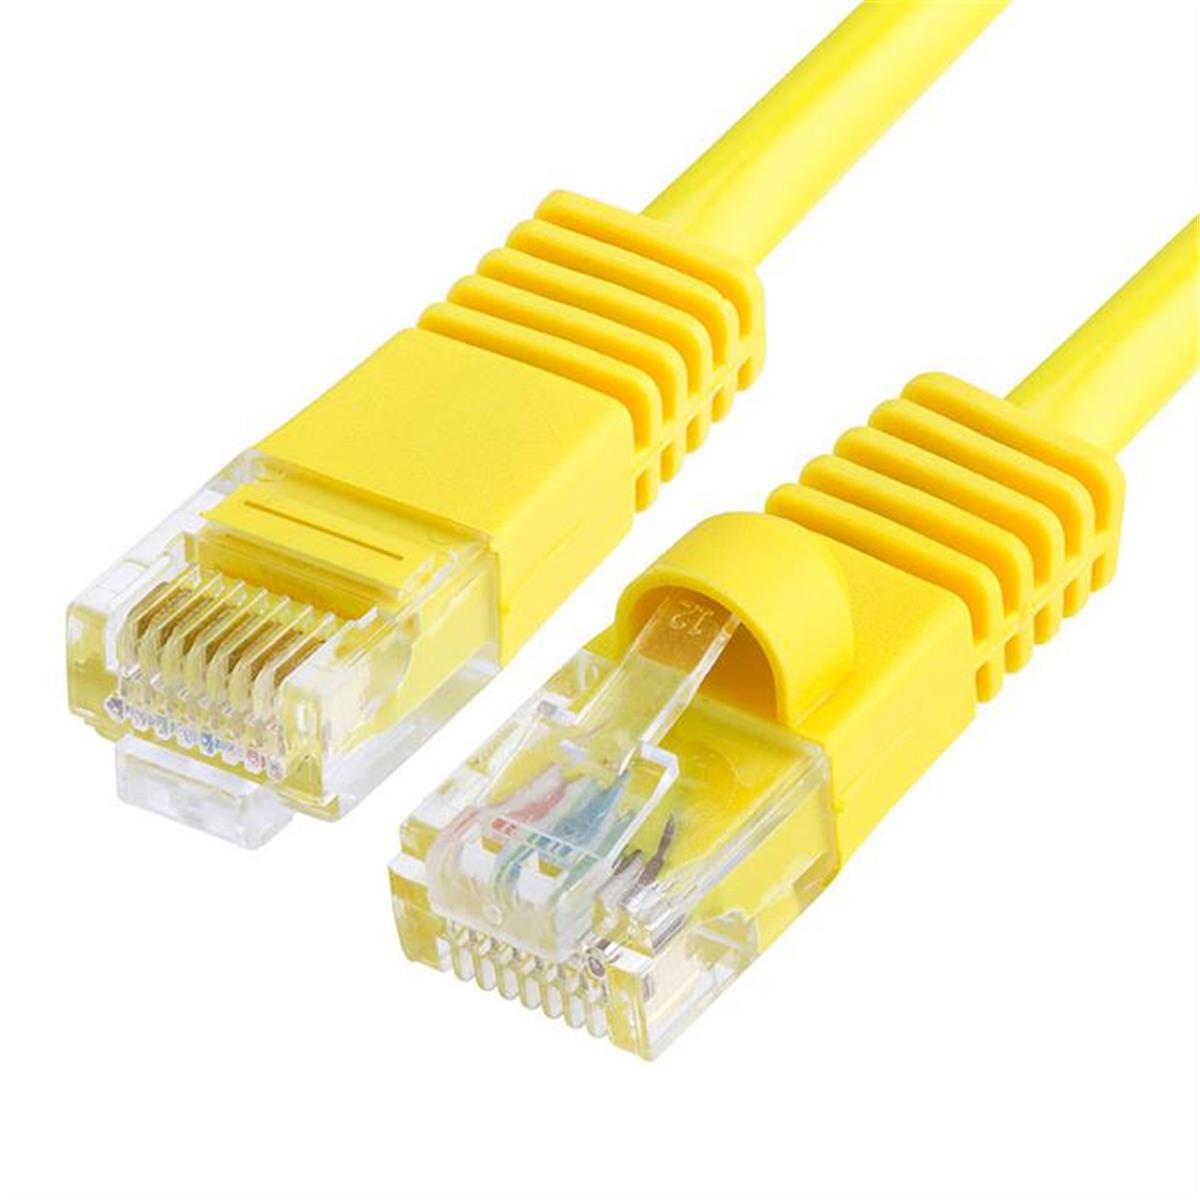 871-n 350 Mhz Rj45 Cat5e Ethernet Network Patch Cable - 3 Ft. - Yellow